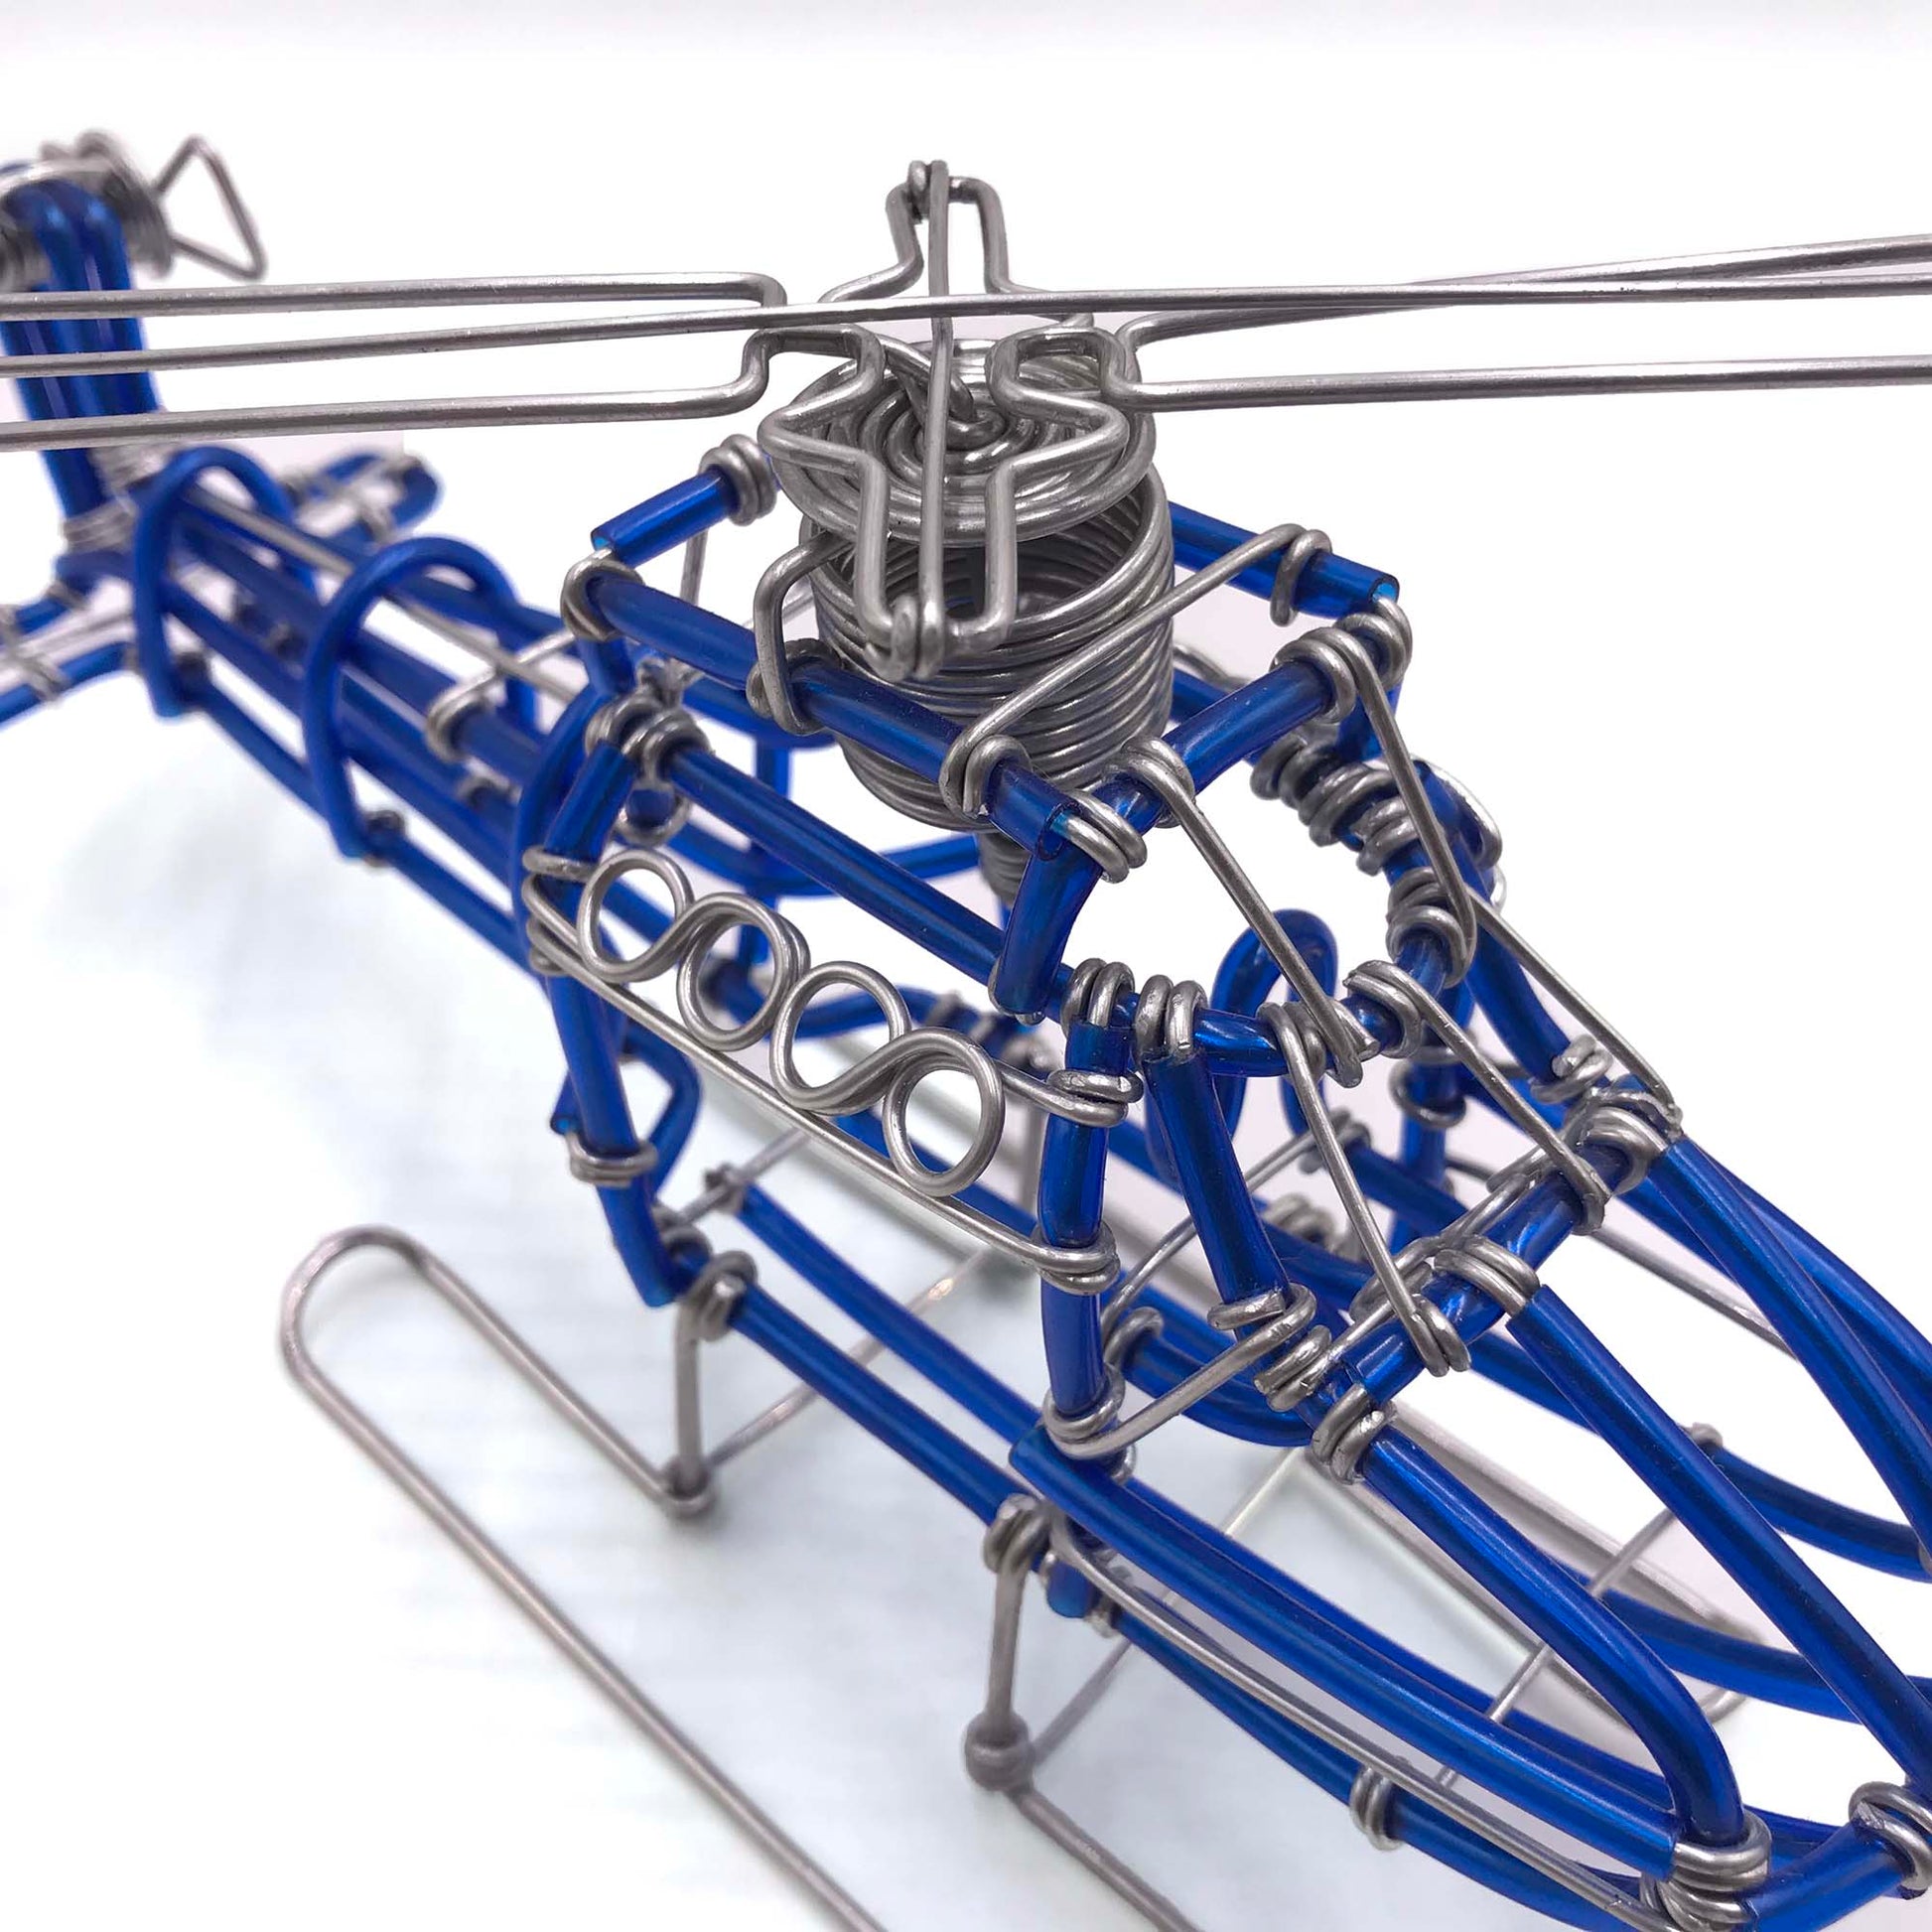 Miniature Wire Art Helicopter hand-crafted from aluminium wire